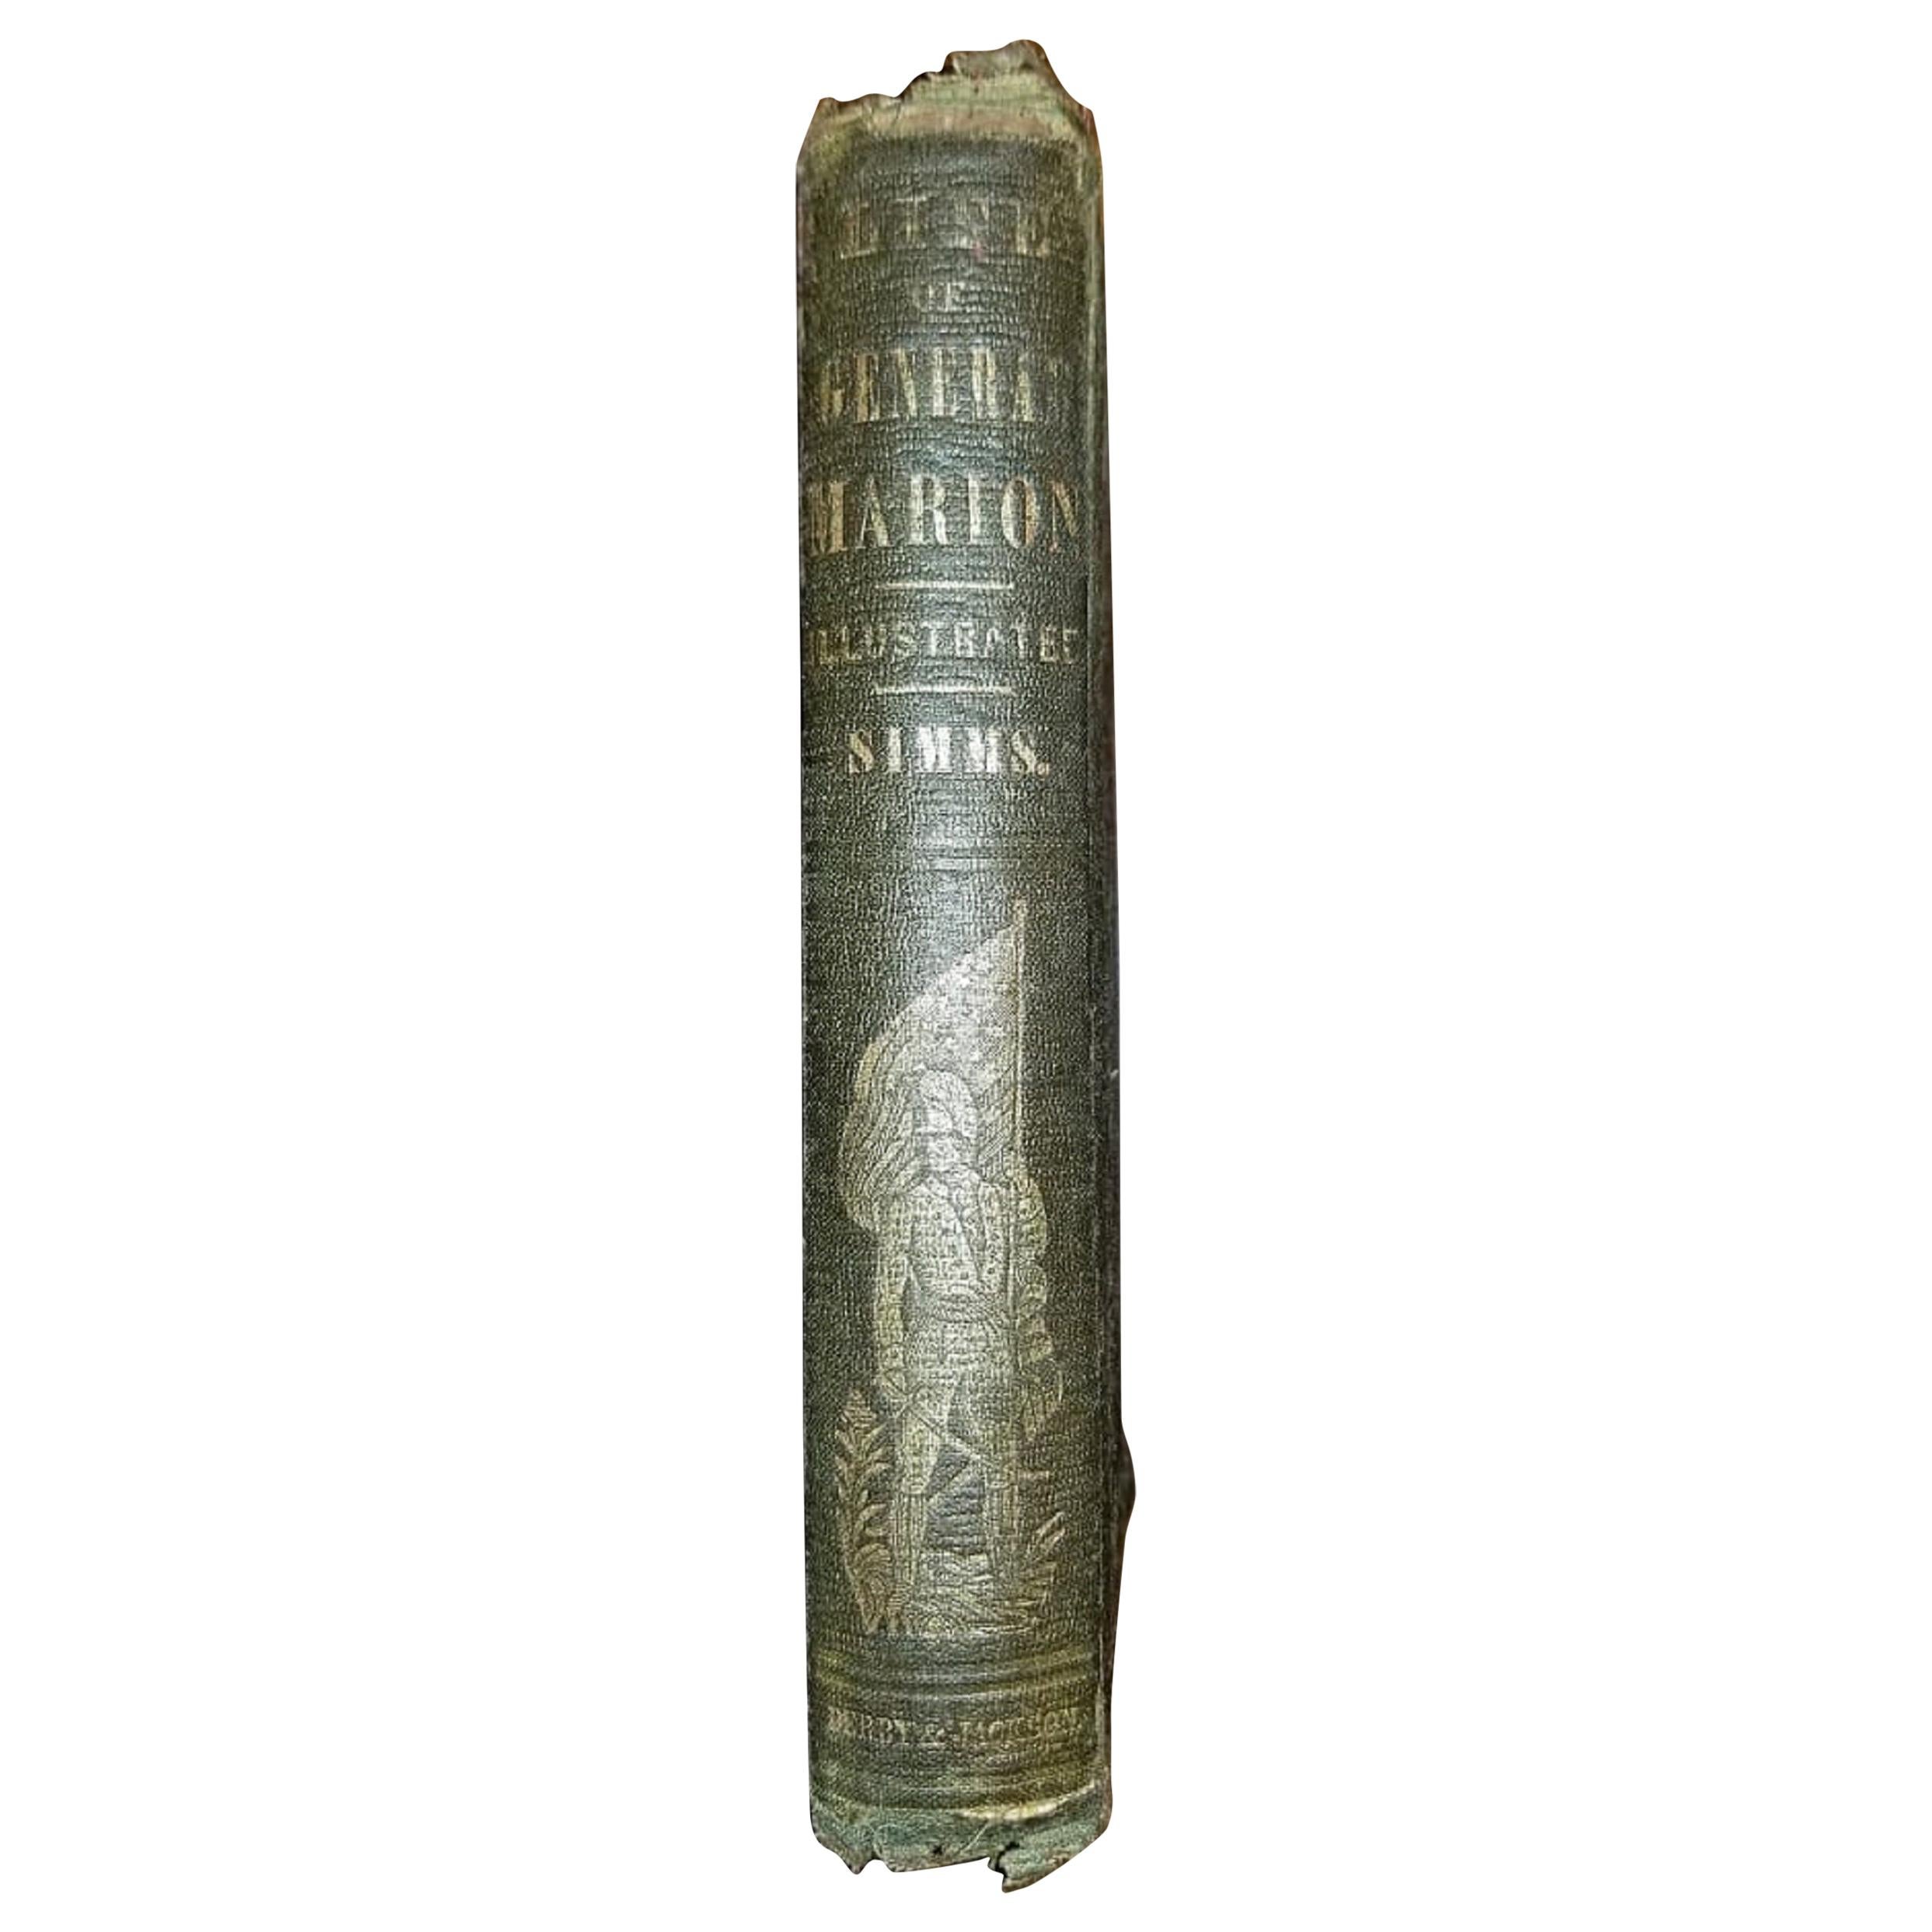 The Life of Francis Marion by Simms, 1855